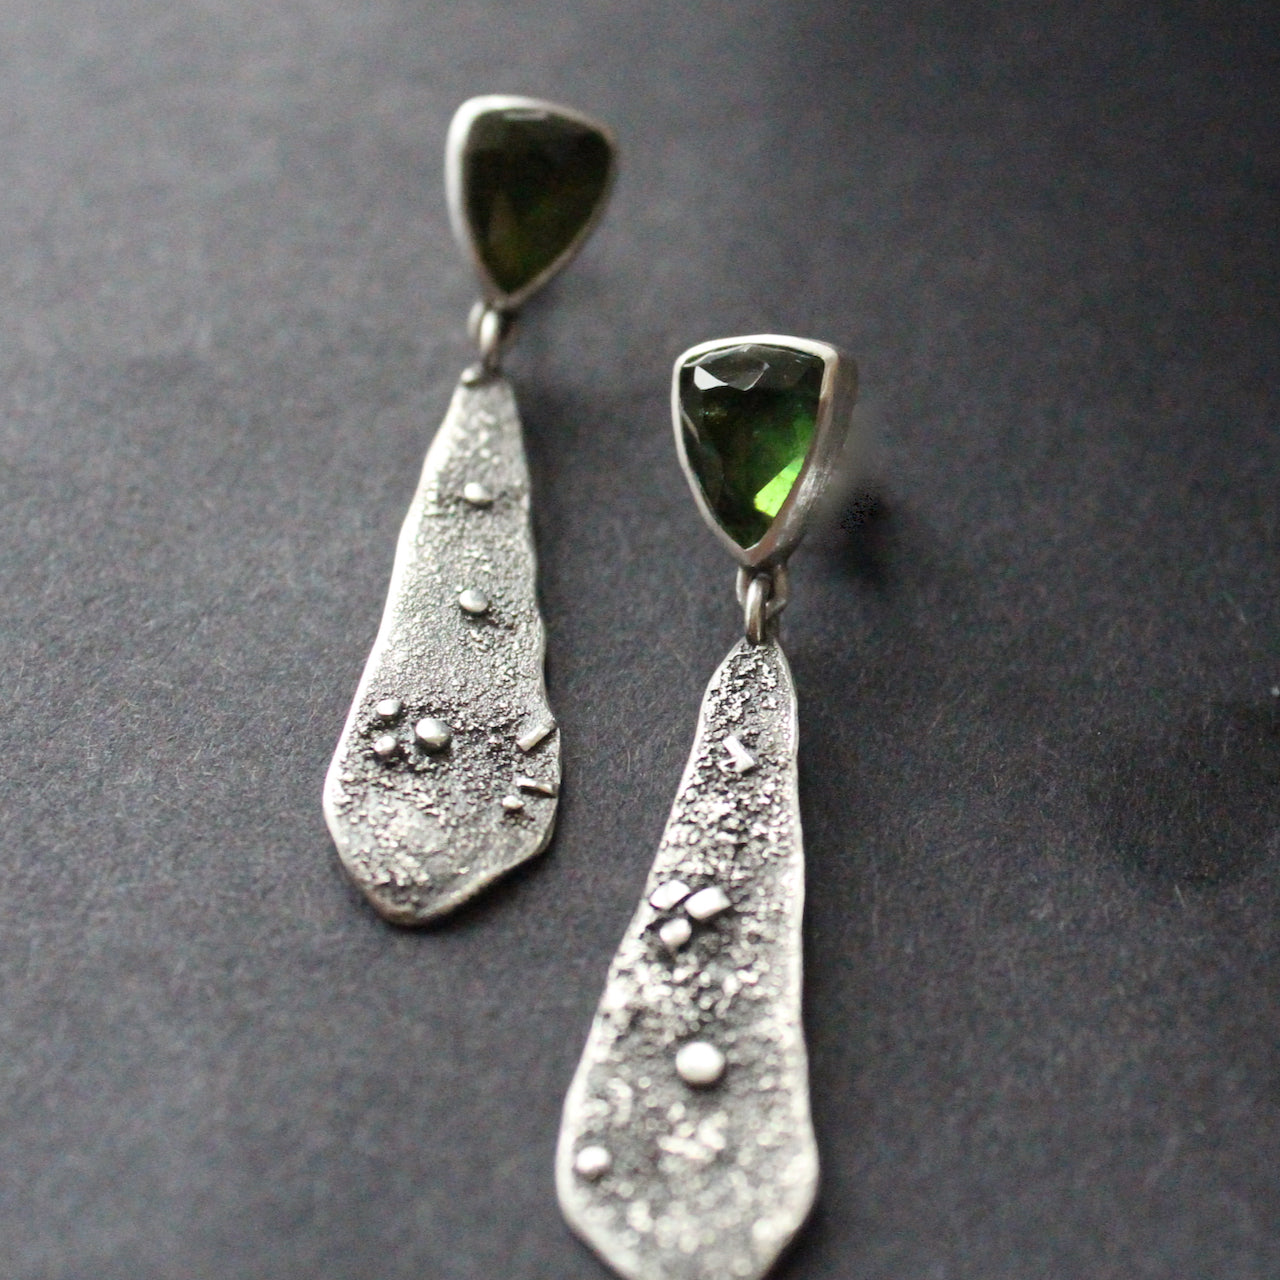 textured silver earrings with a dark green stone by jeweller Carin Lindberg.